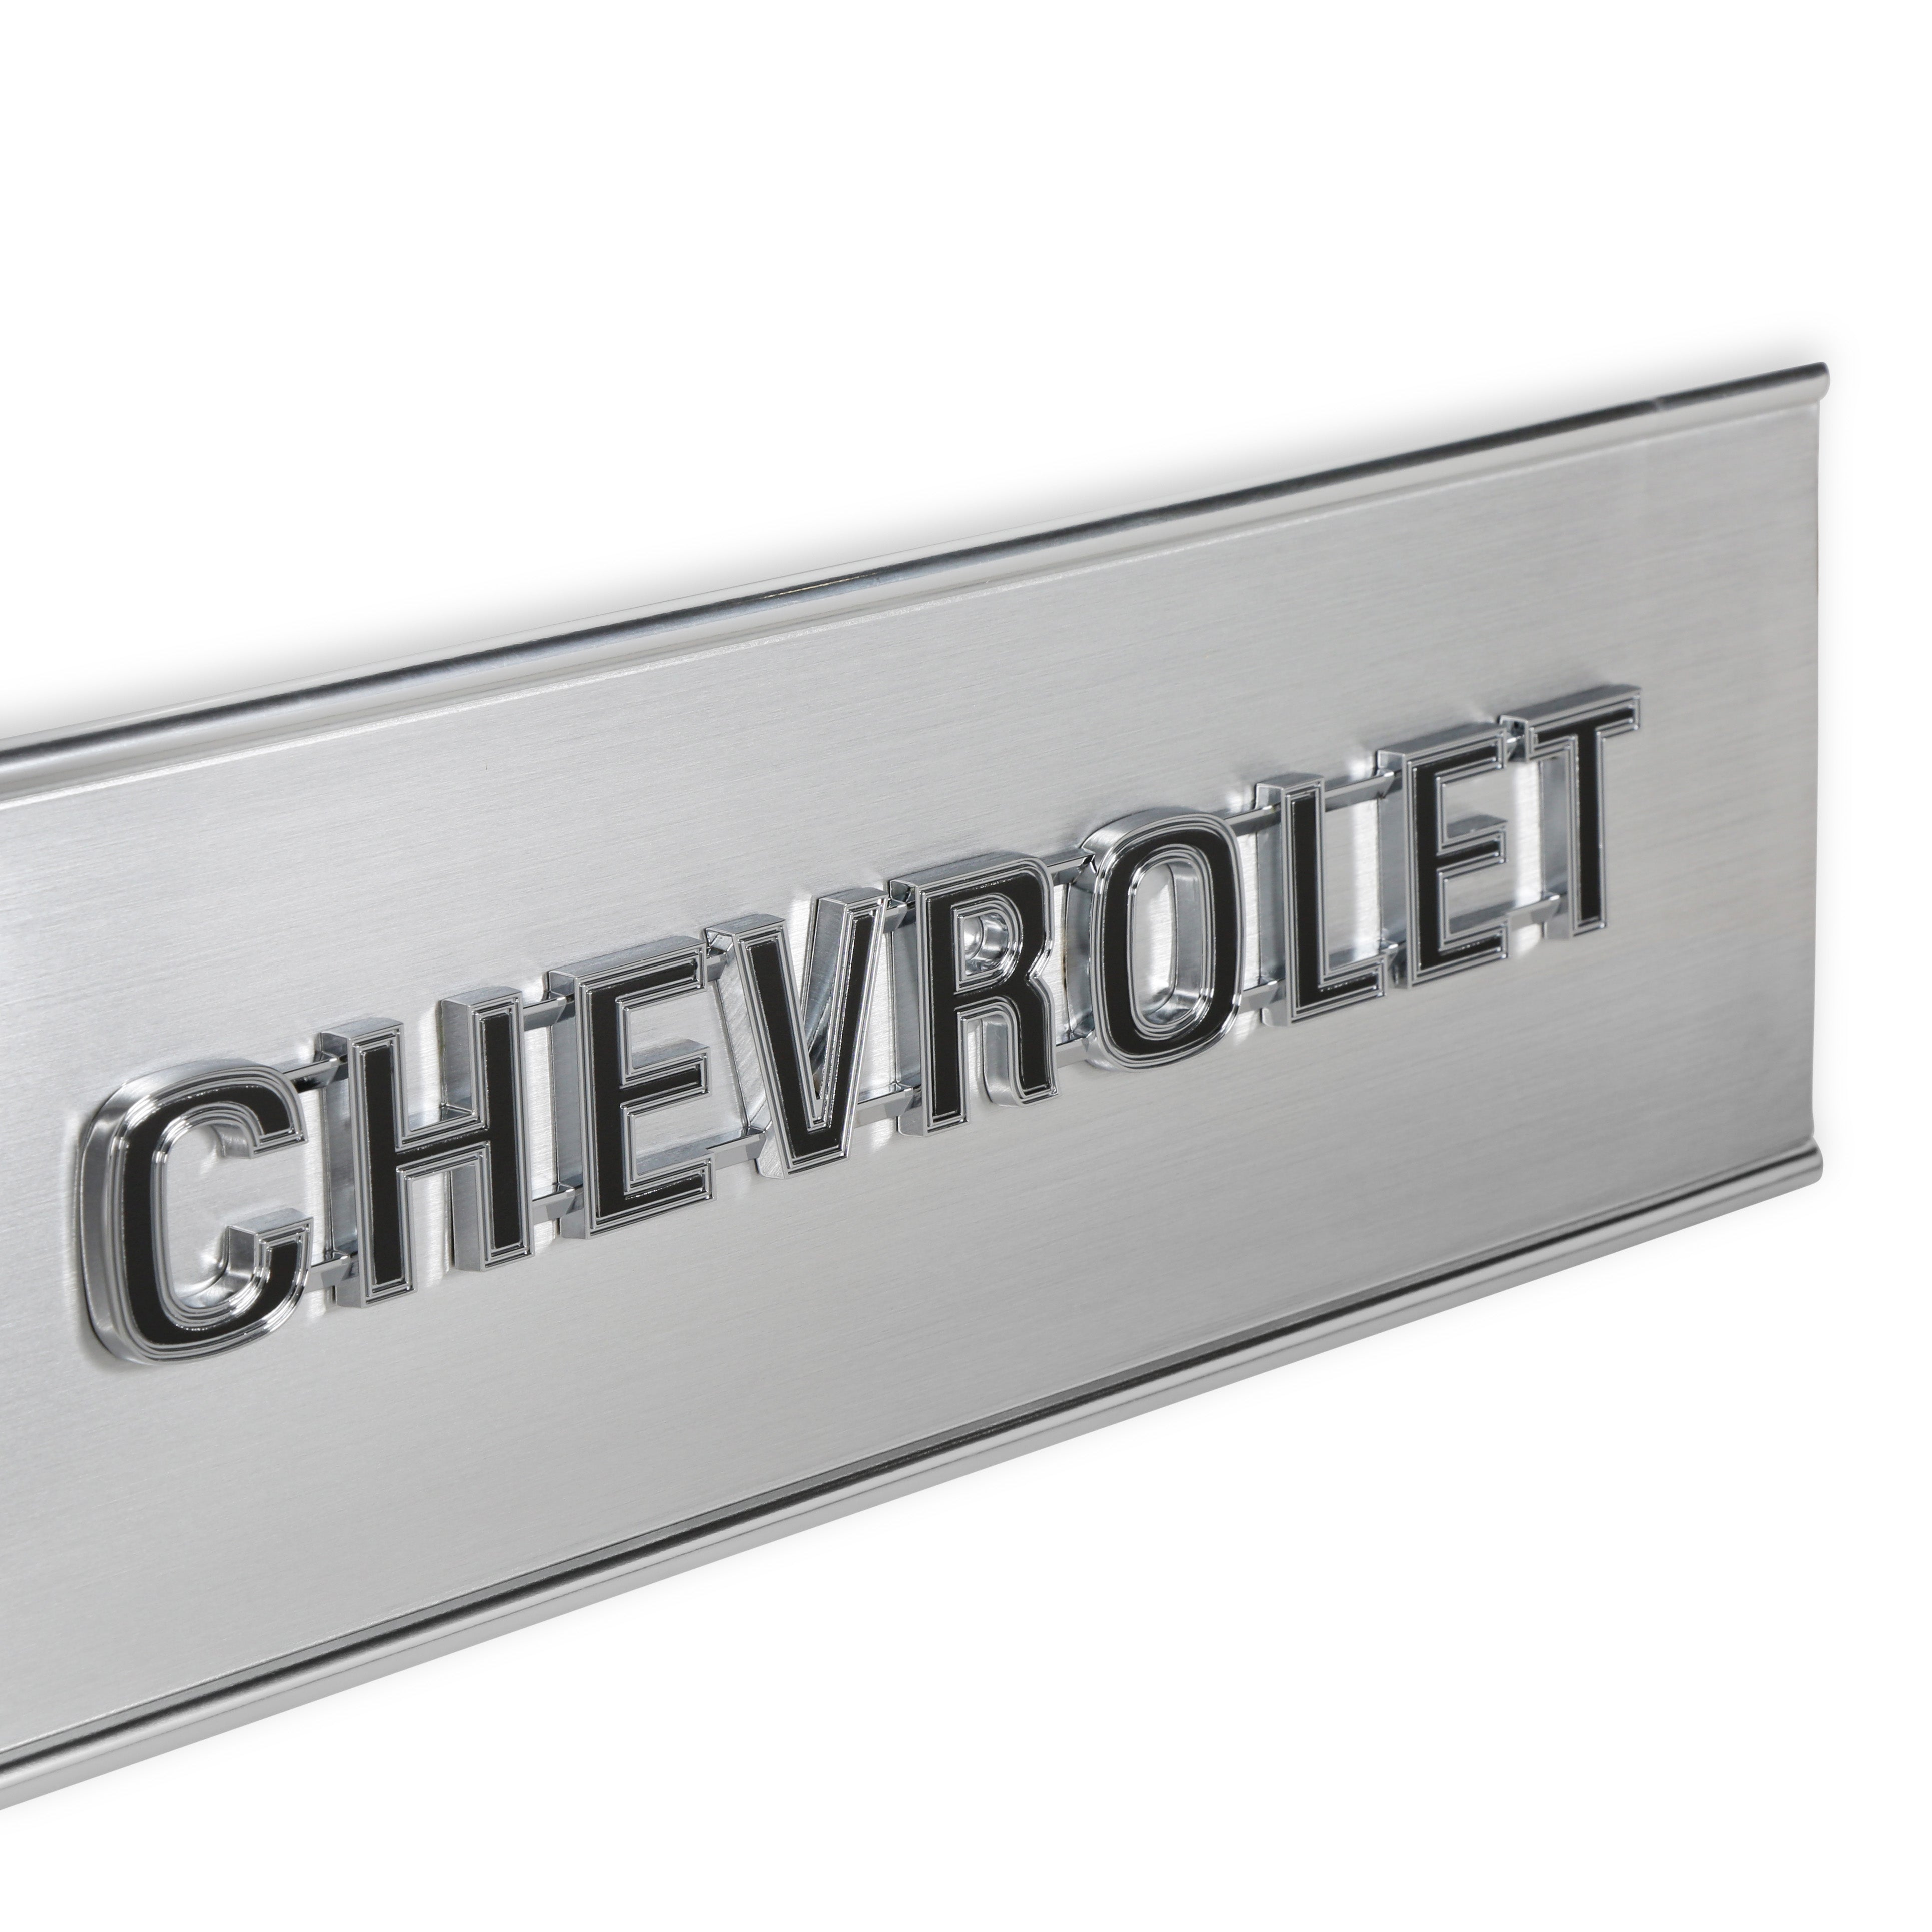 BROTHERS C/K Chevy Tailgate Trim Panel - Brushed Aluminum pn 04-534